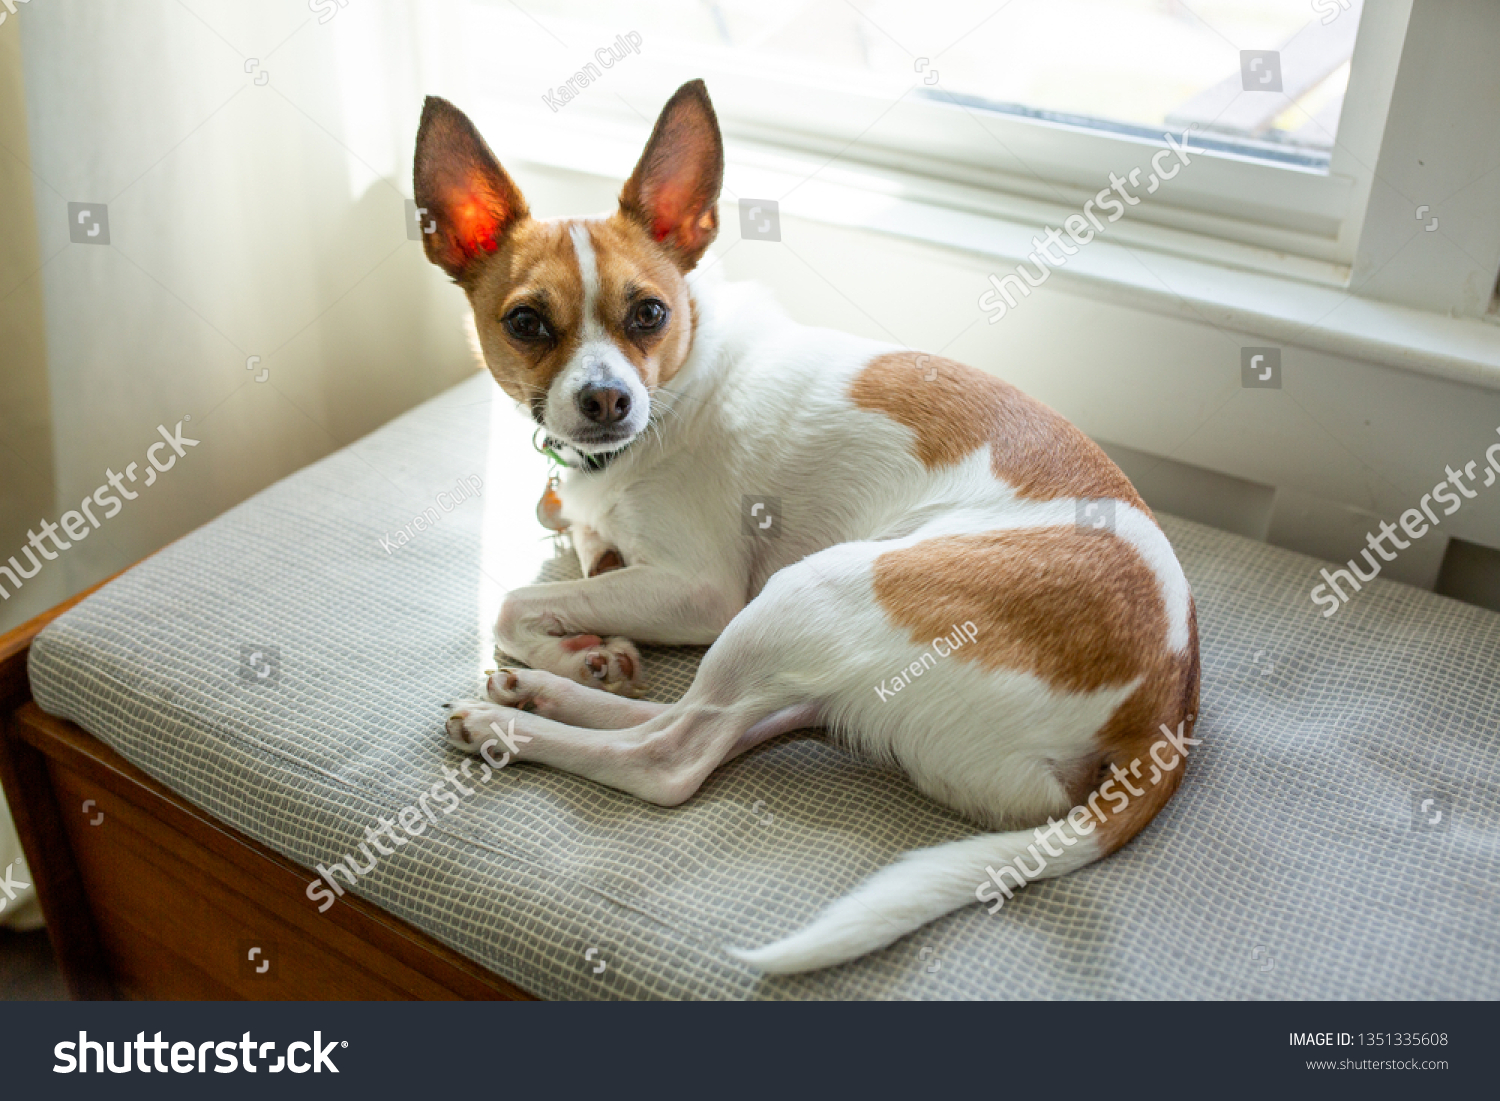 Jack Russell Terrier Mix Animals Wildlife Stock Image 1351335608